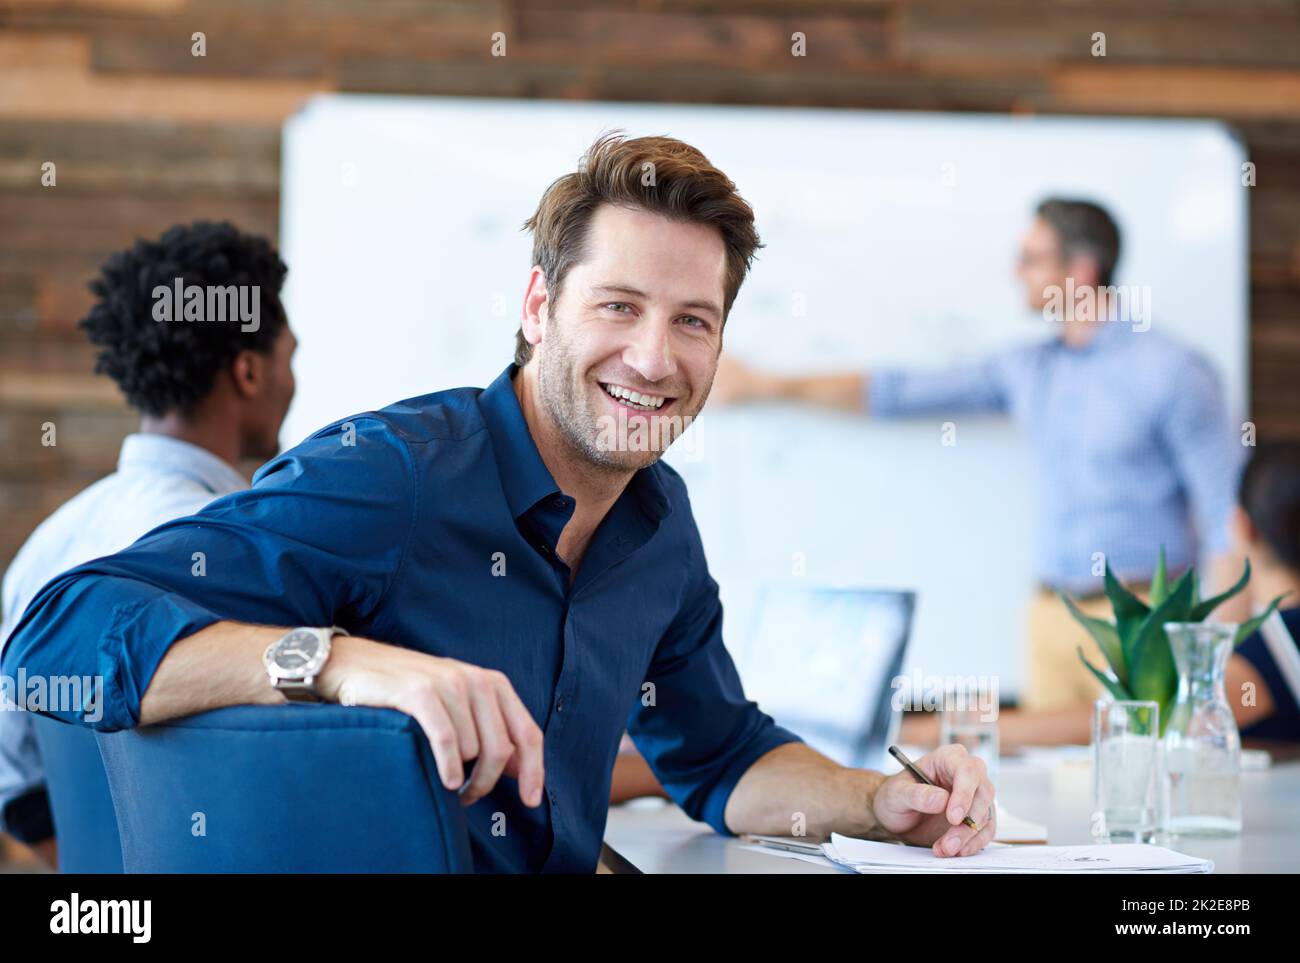 Making my creativity work for me. Portrait of a handsome creative professional smiling at the camera in a modern conference room. Stock Photo